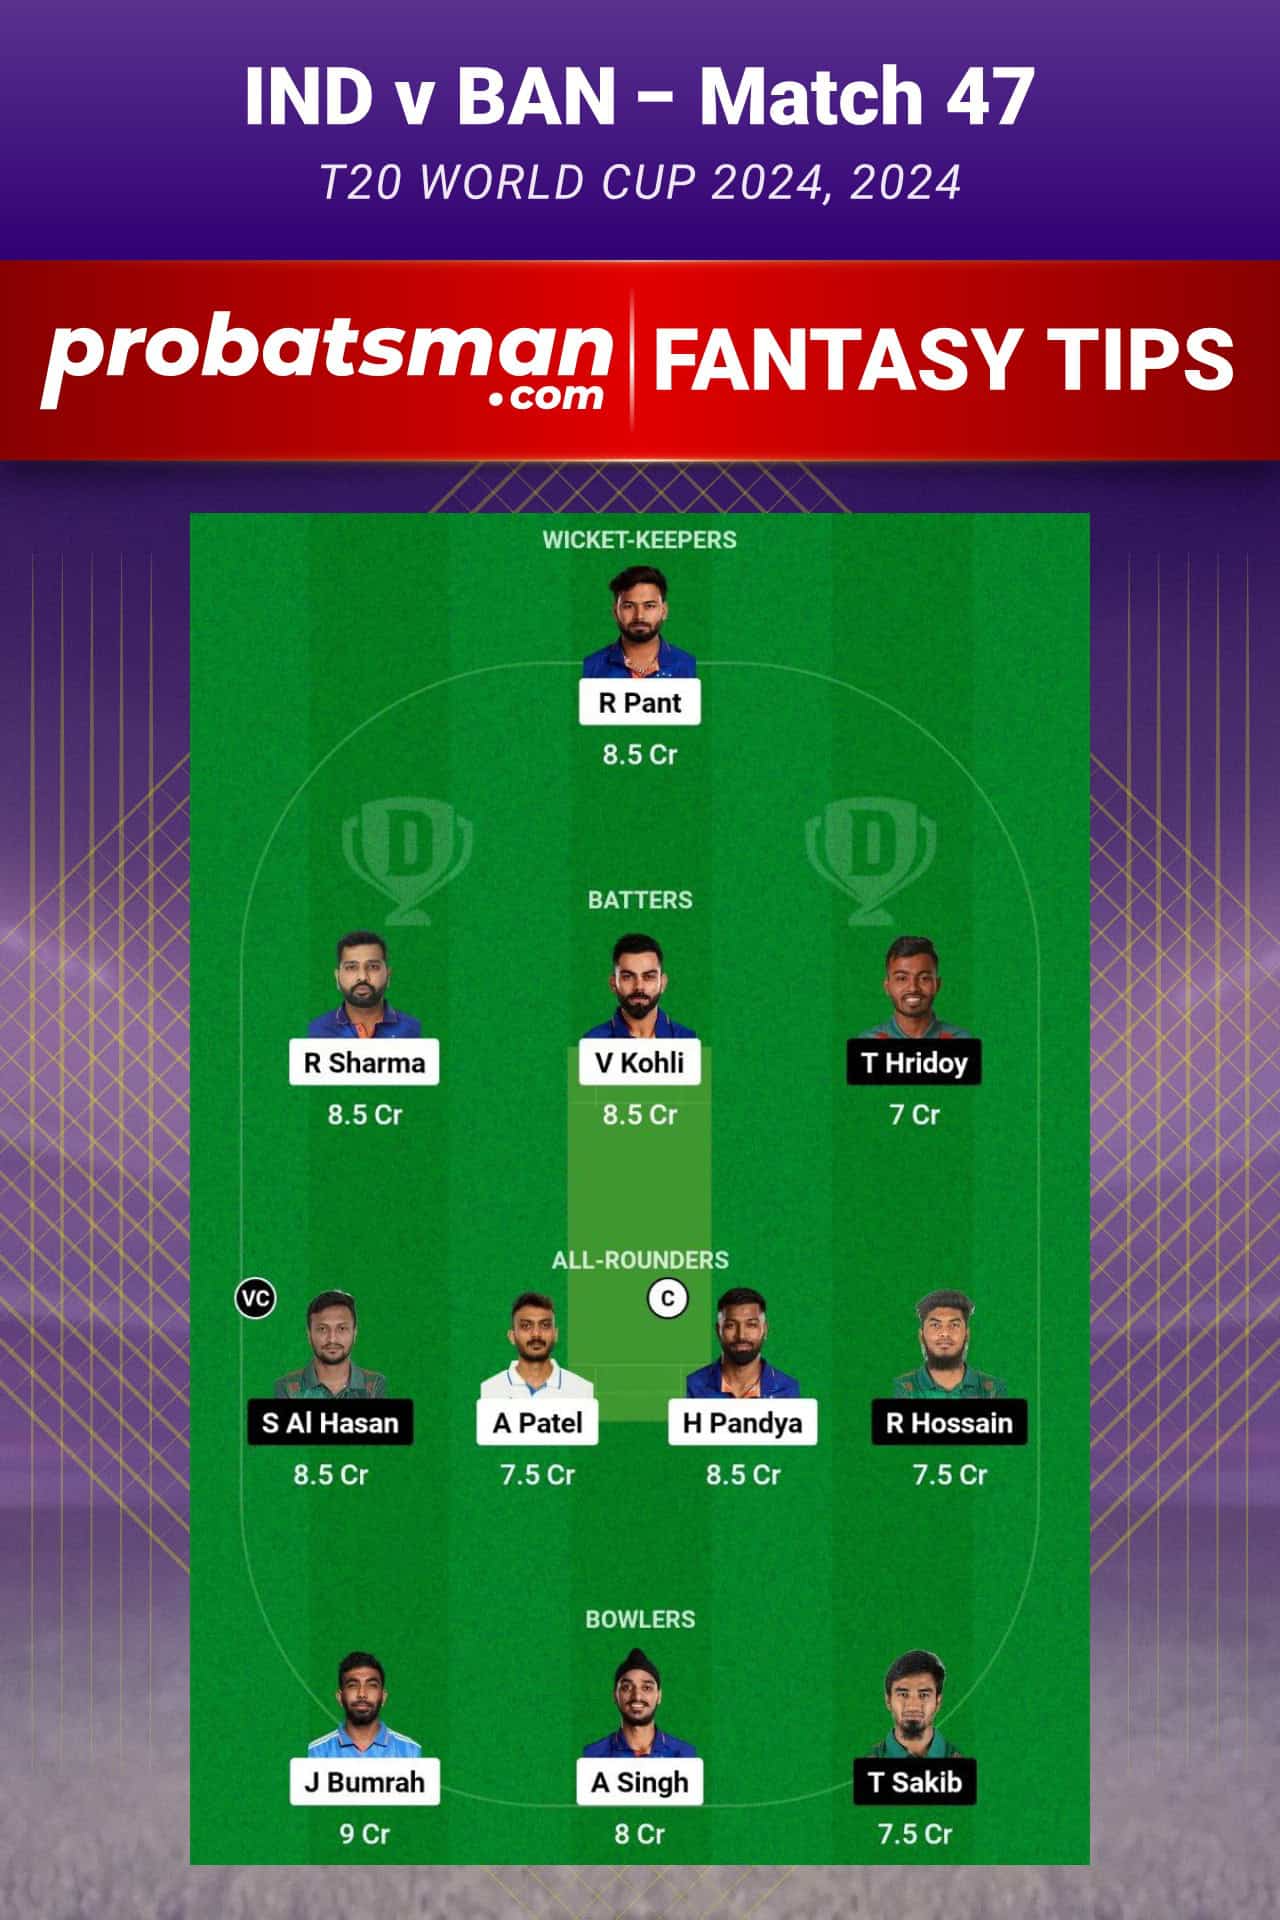 IND vs BAN Dream11 Prediction, Fantasy Cricket Tips, Playing XI, Pitch Report, Player Stats & Injury Updates For Match 47 of T20 World Cup 2024